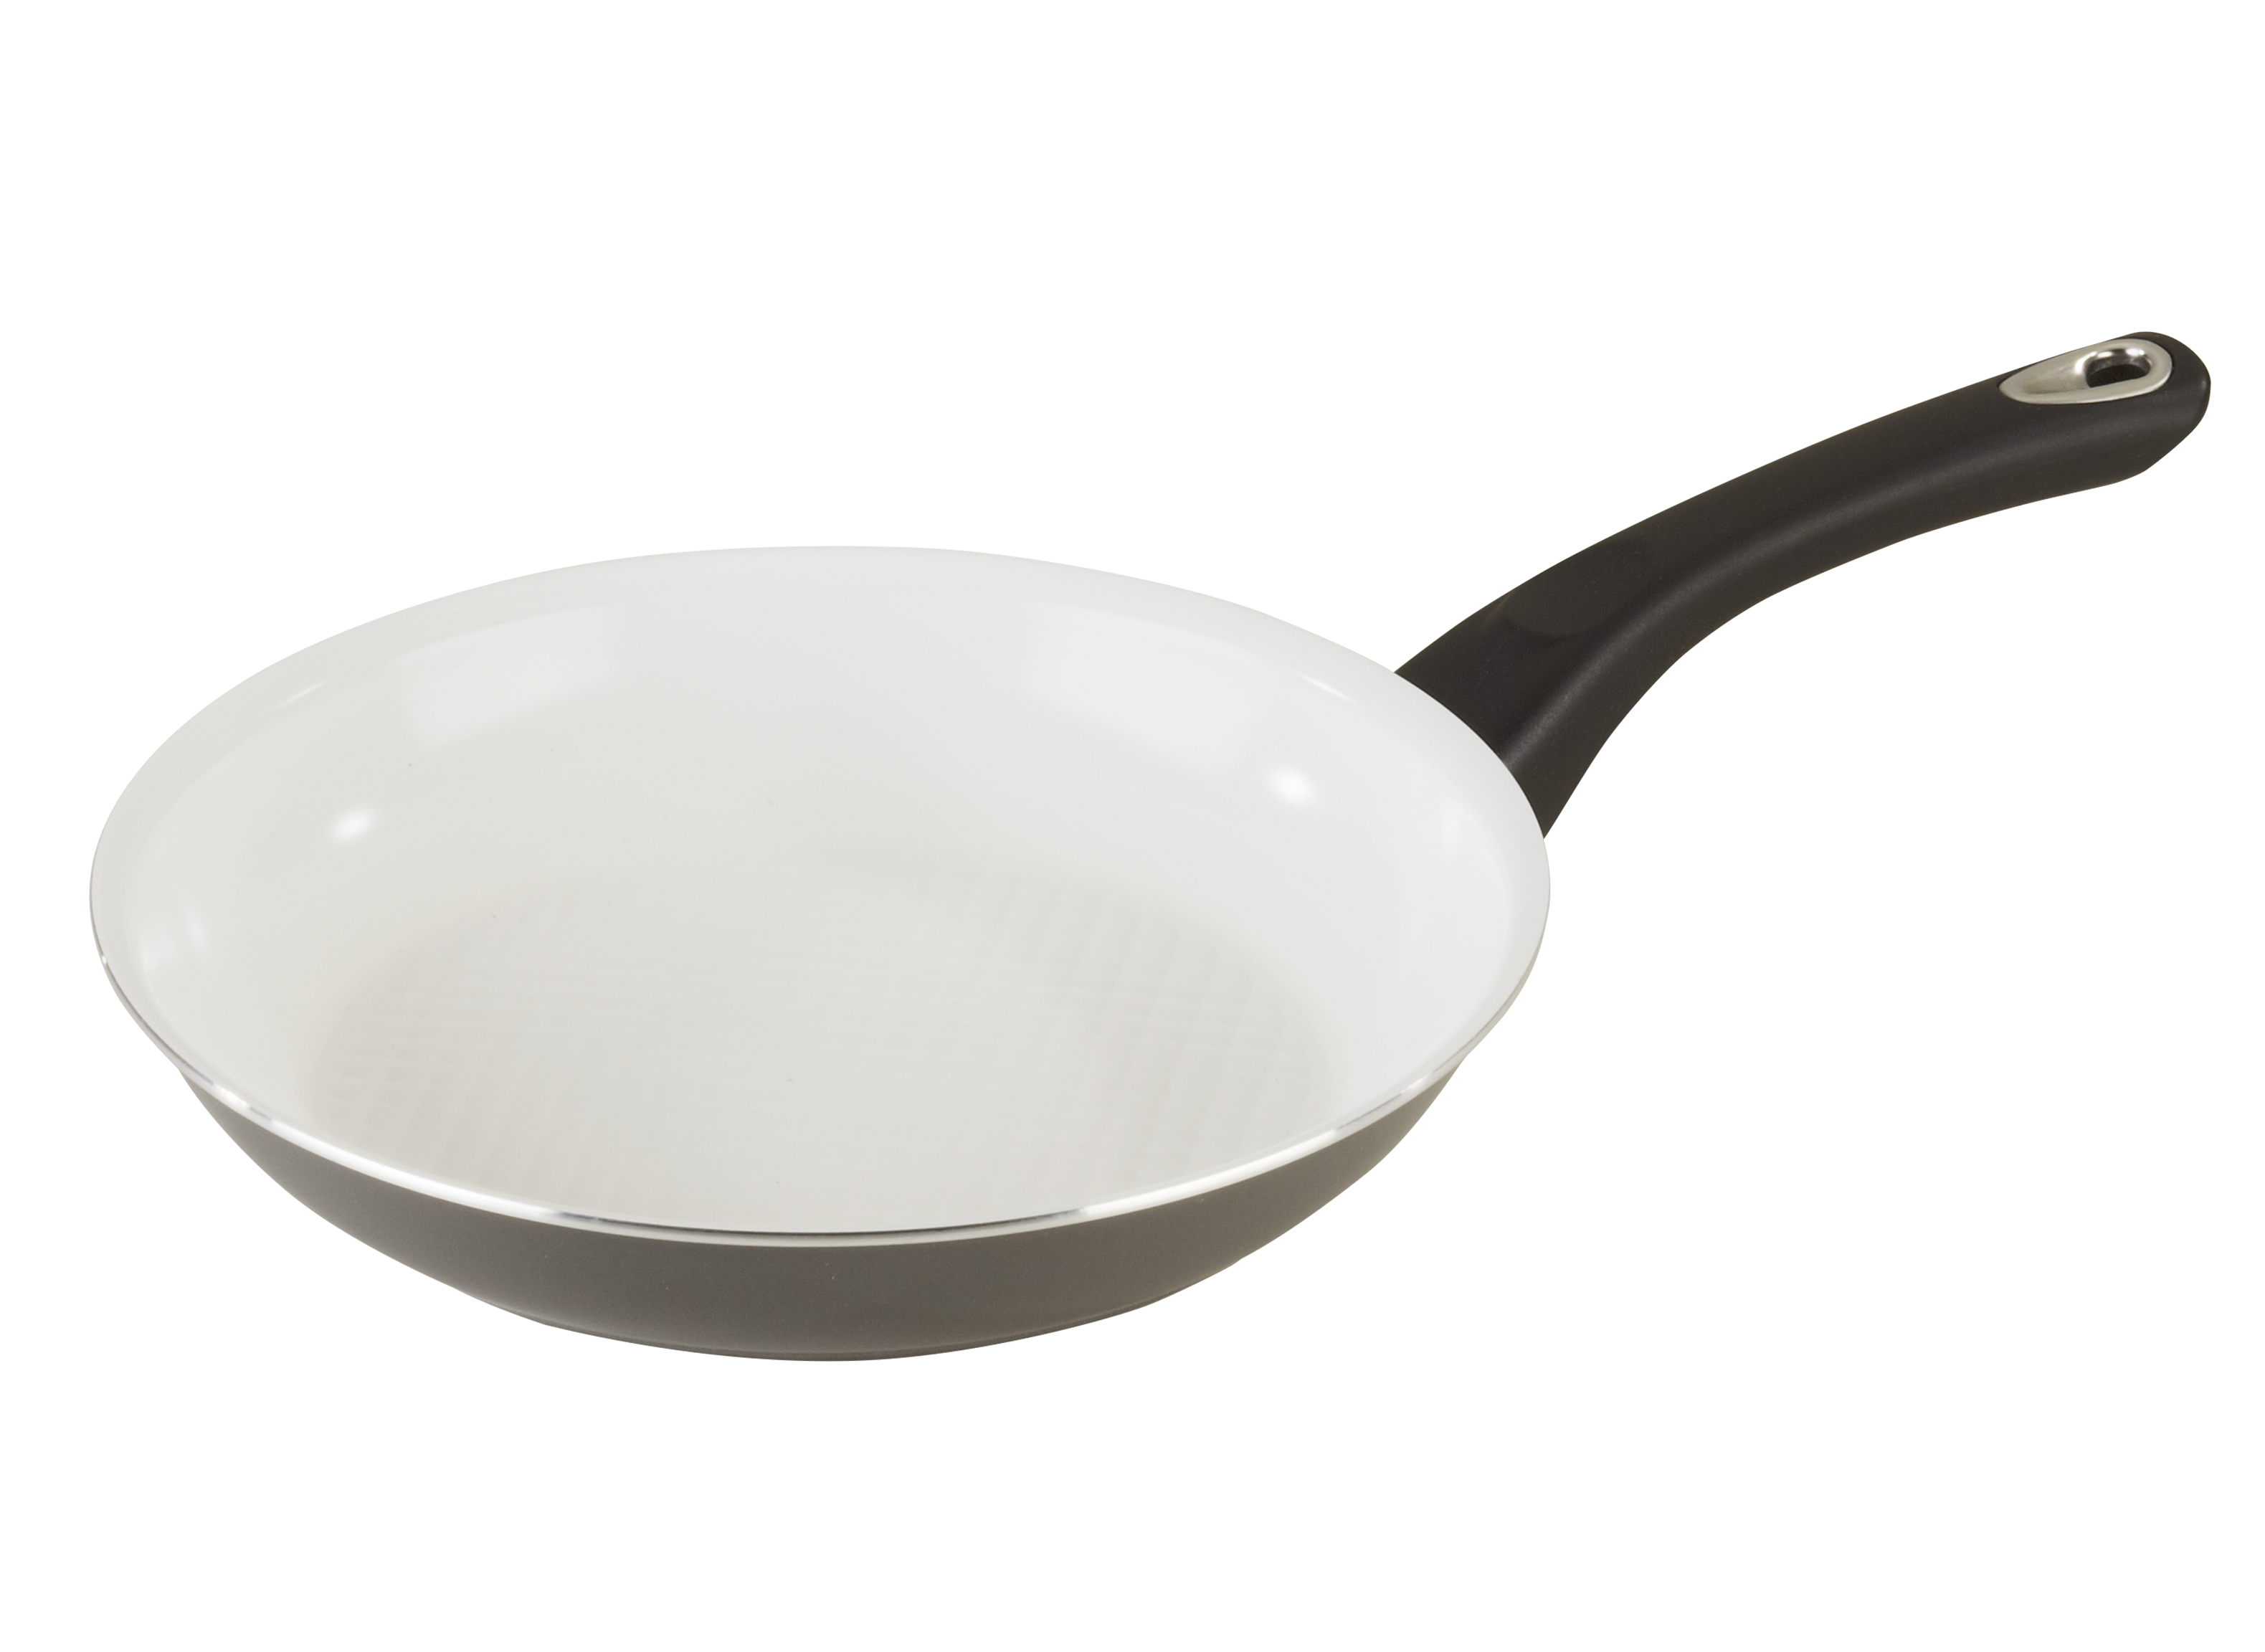 https://crdms.images.consumerreports.org/prod/products/cr/models/393374-fryingpans-farberware-purecooknonstick.png